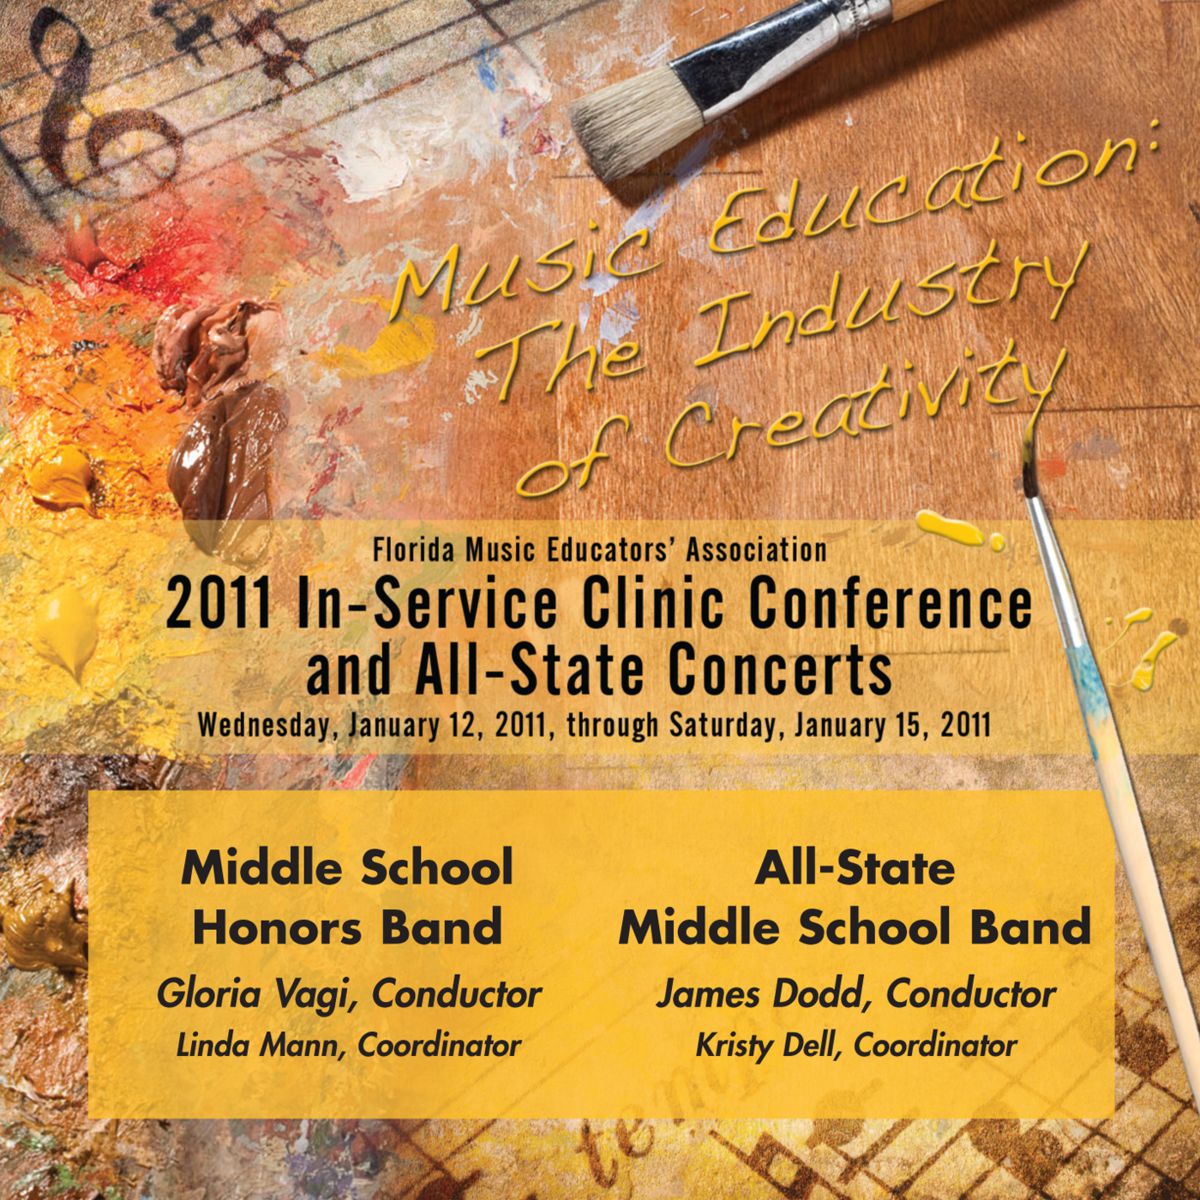 2011 Florida Music Educators Association: Middle School Honors Band and All-State Middle School Band - clicca qui